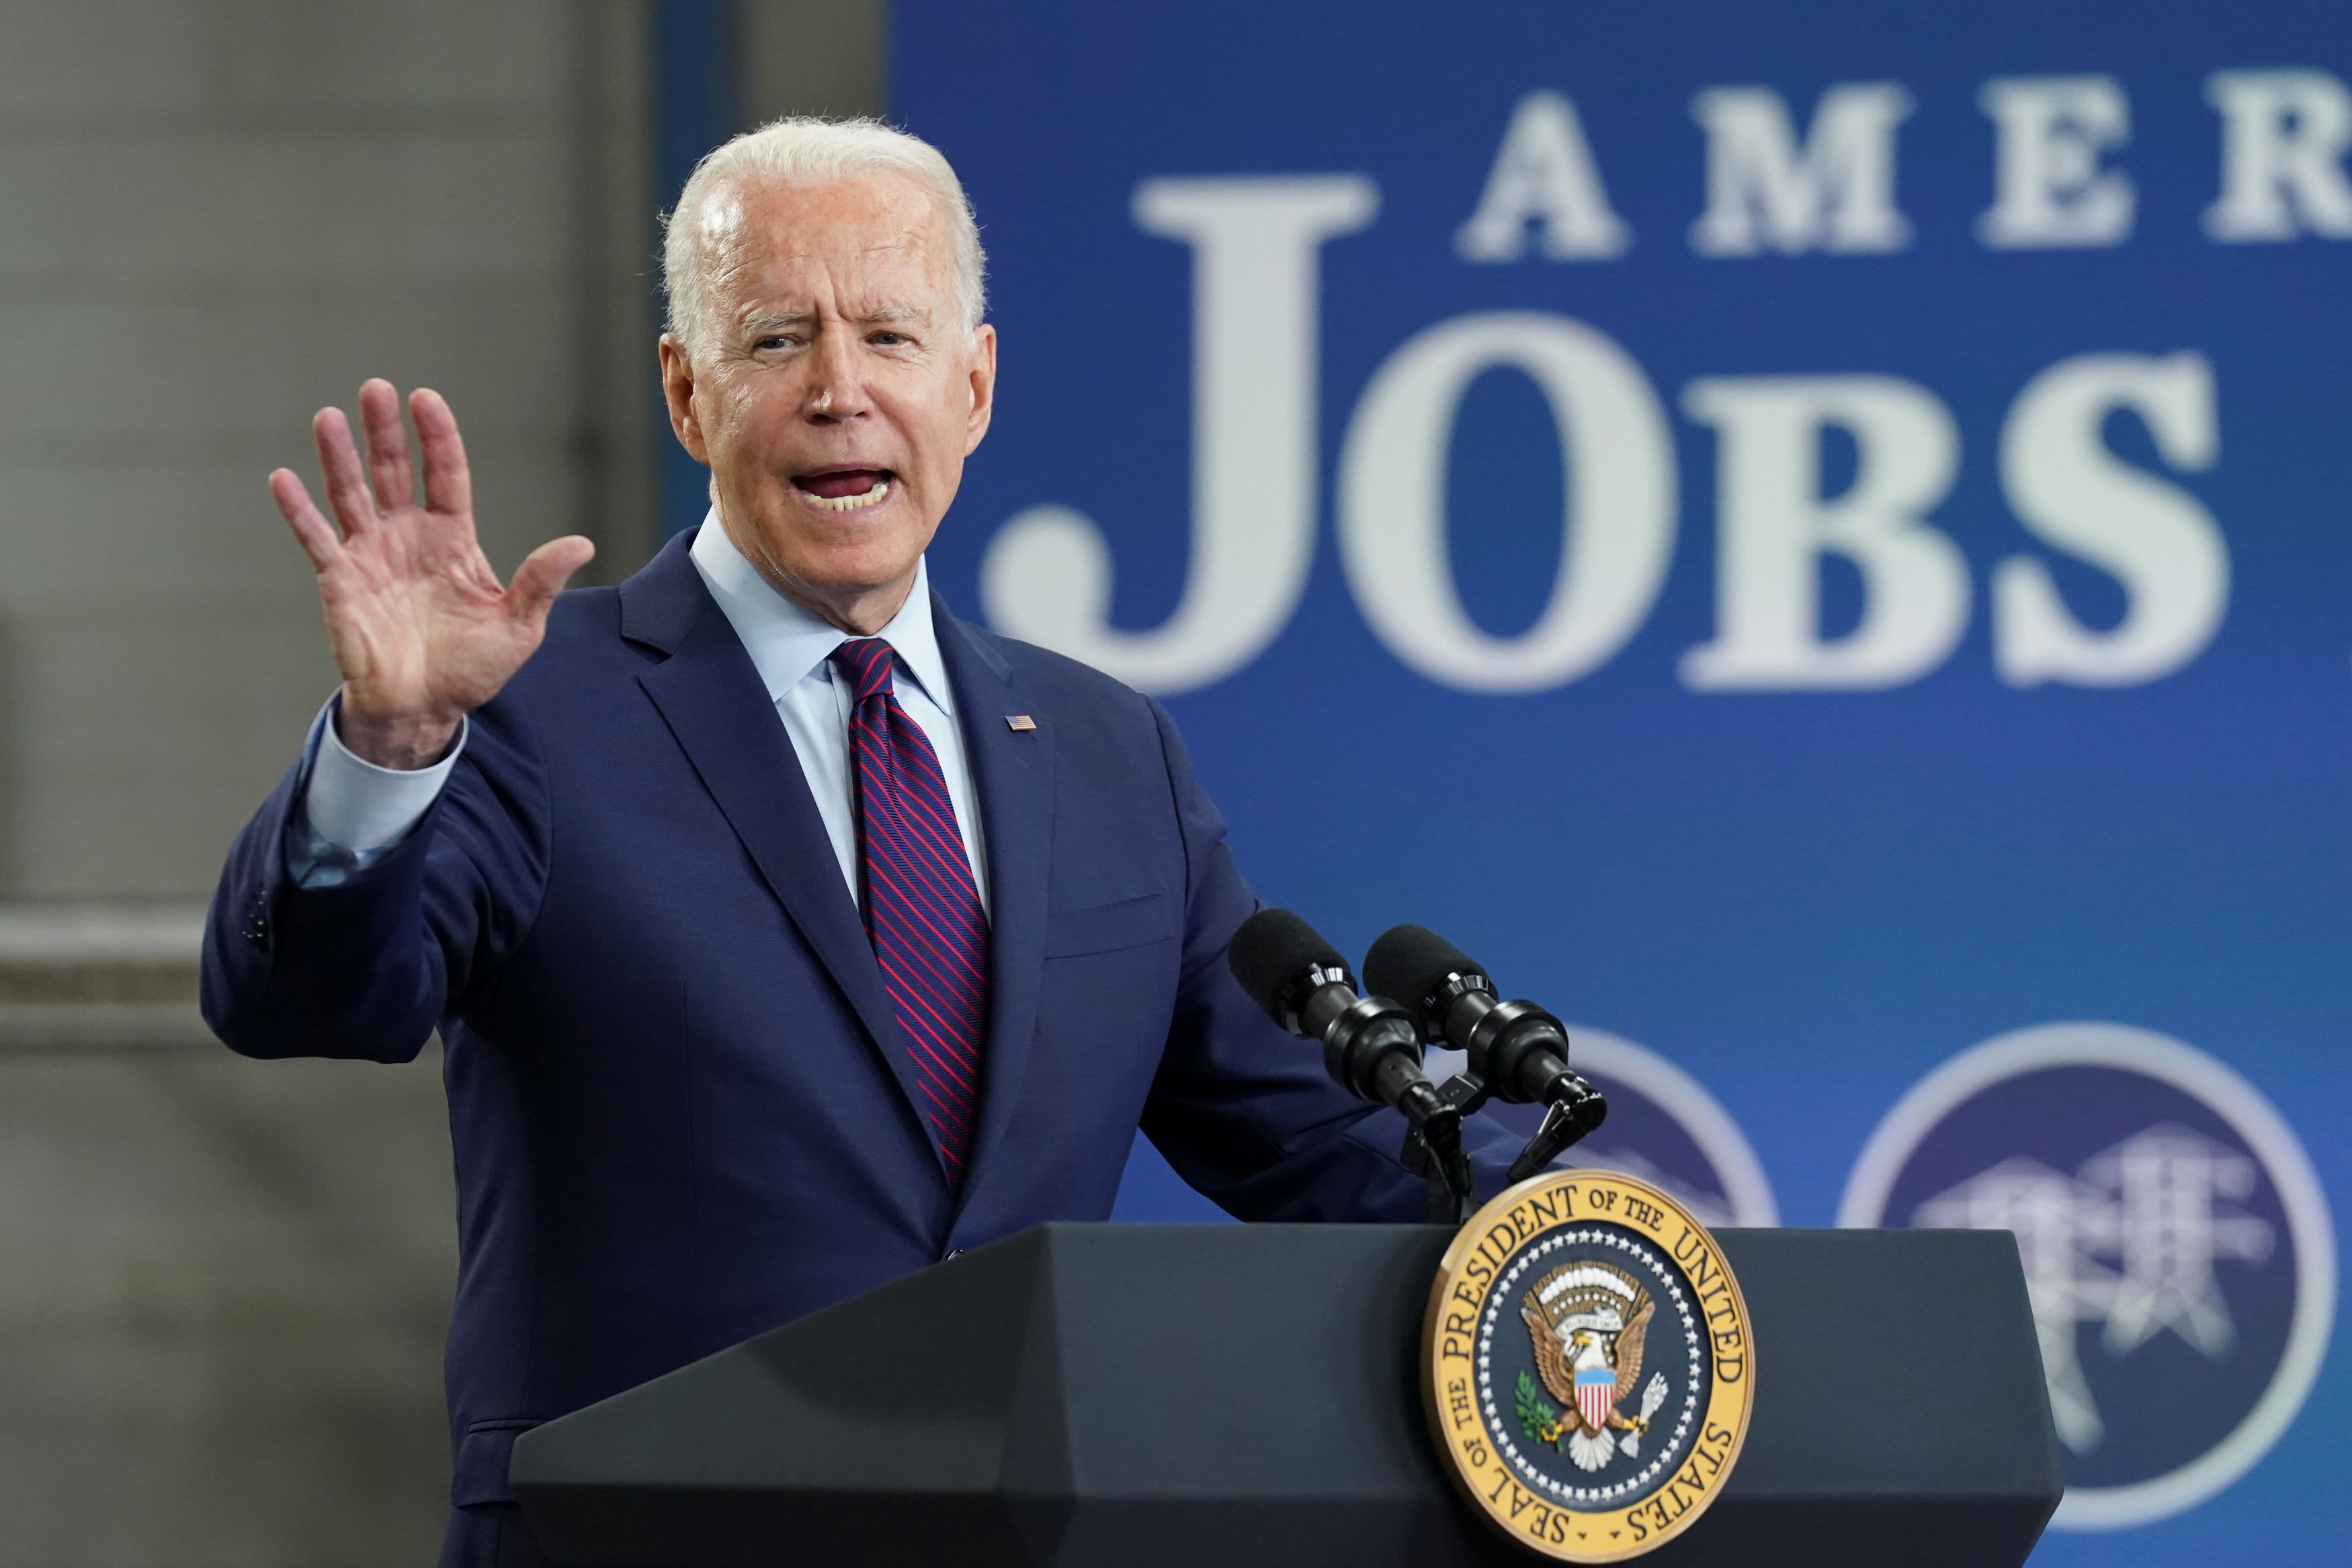 Biden takes his bipartisan infrastructure deal road show to Wisconsin